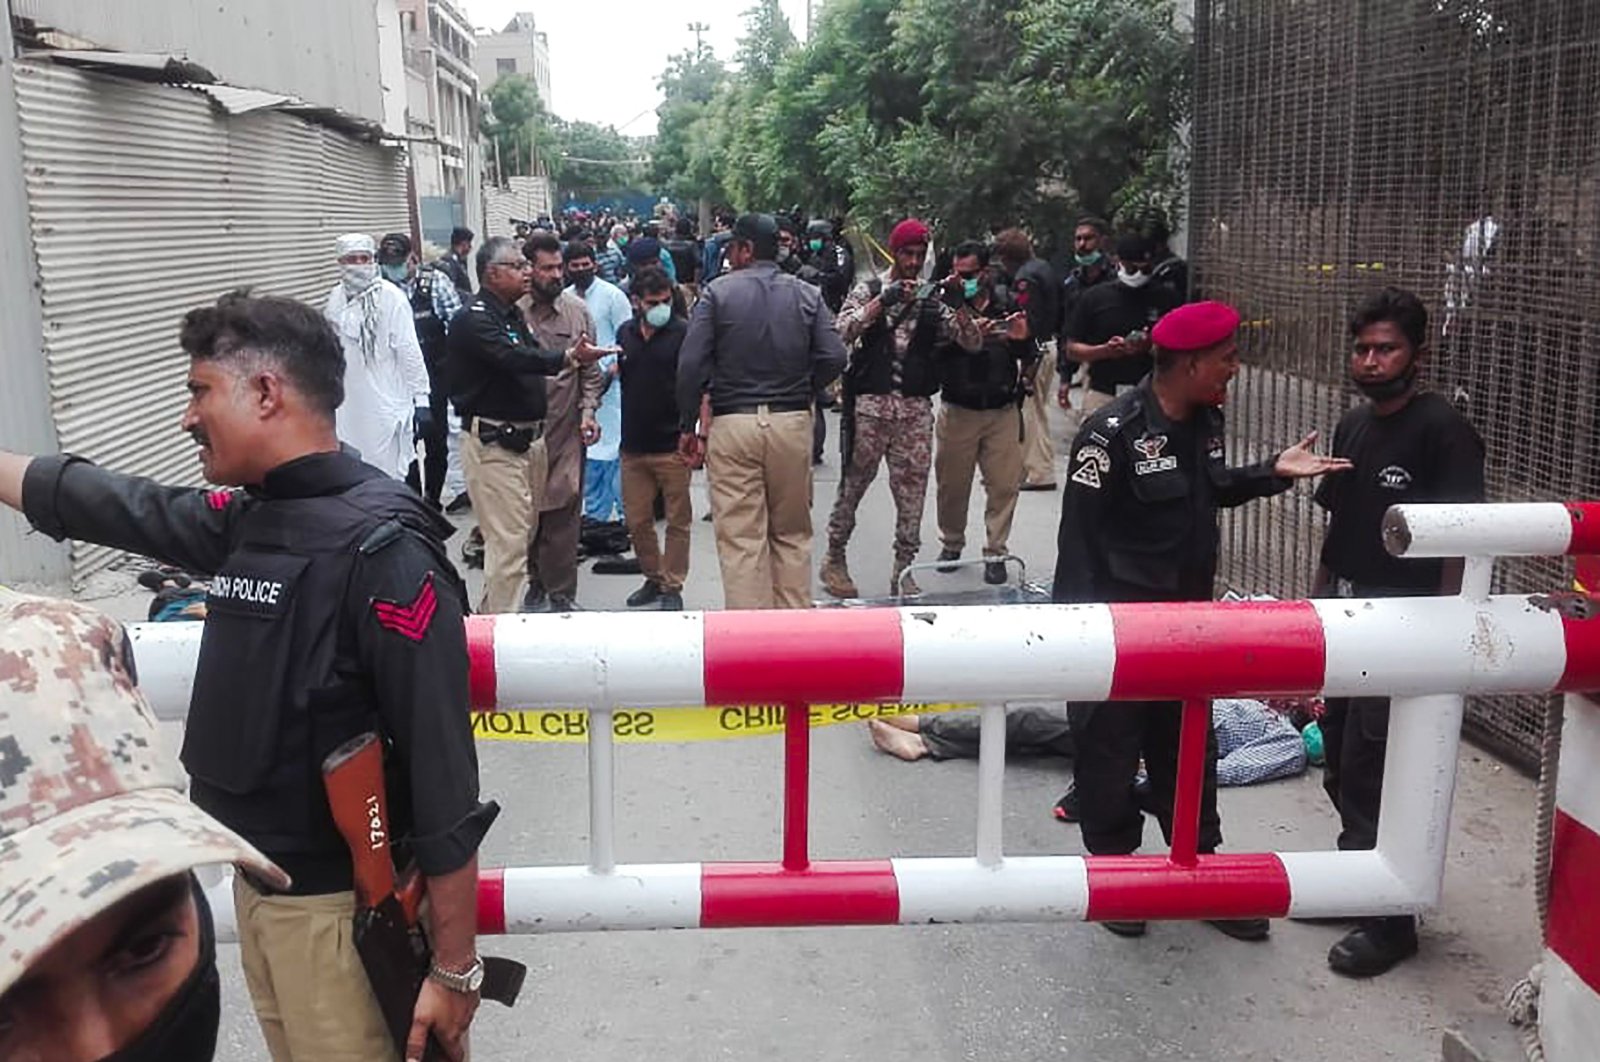 Police secure an area around a body outside the Pakistan Stock Exchange building after a group of gunmen attacked the building in Karachi, Pakistan, June 29, 2020. (AFP Photo)